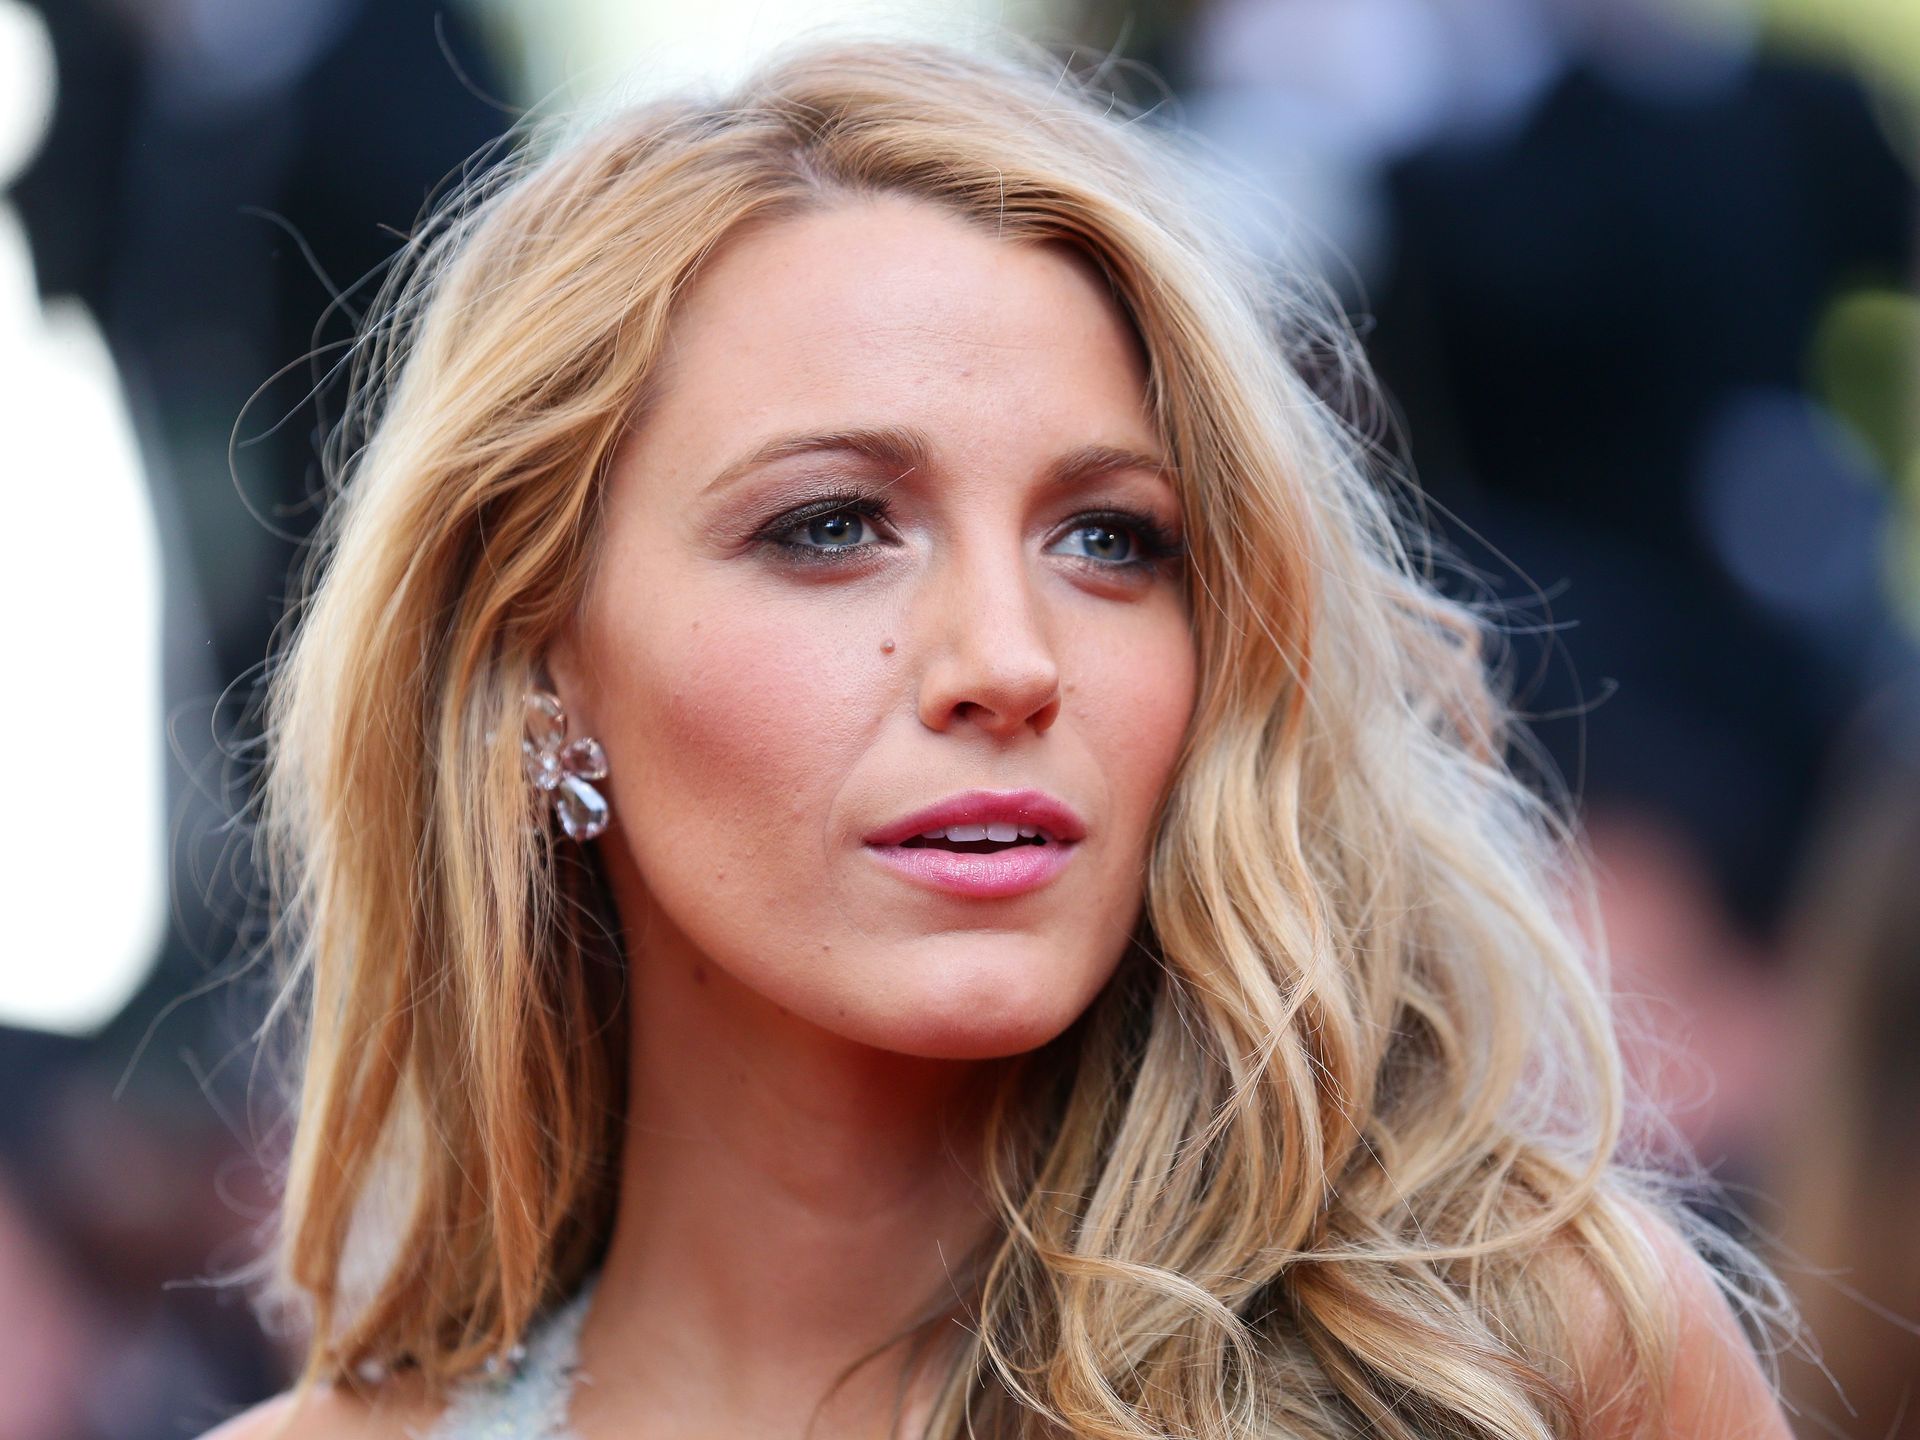 Blake Lively cuts a casual figure in a white crop top and jeans